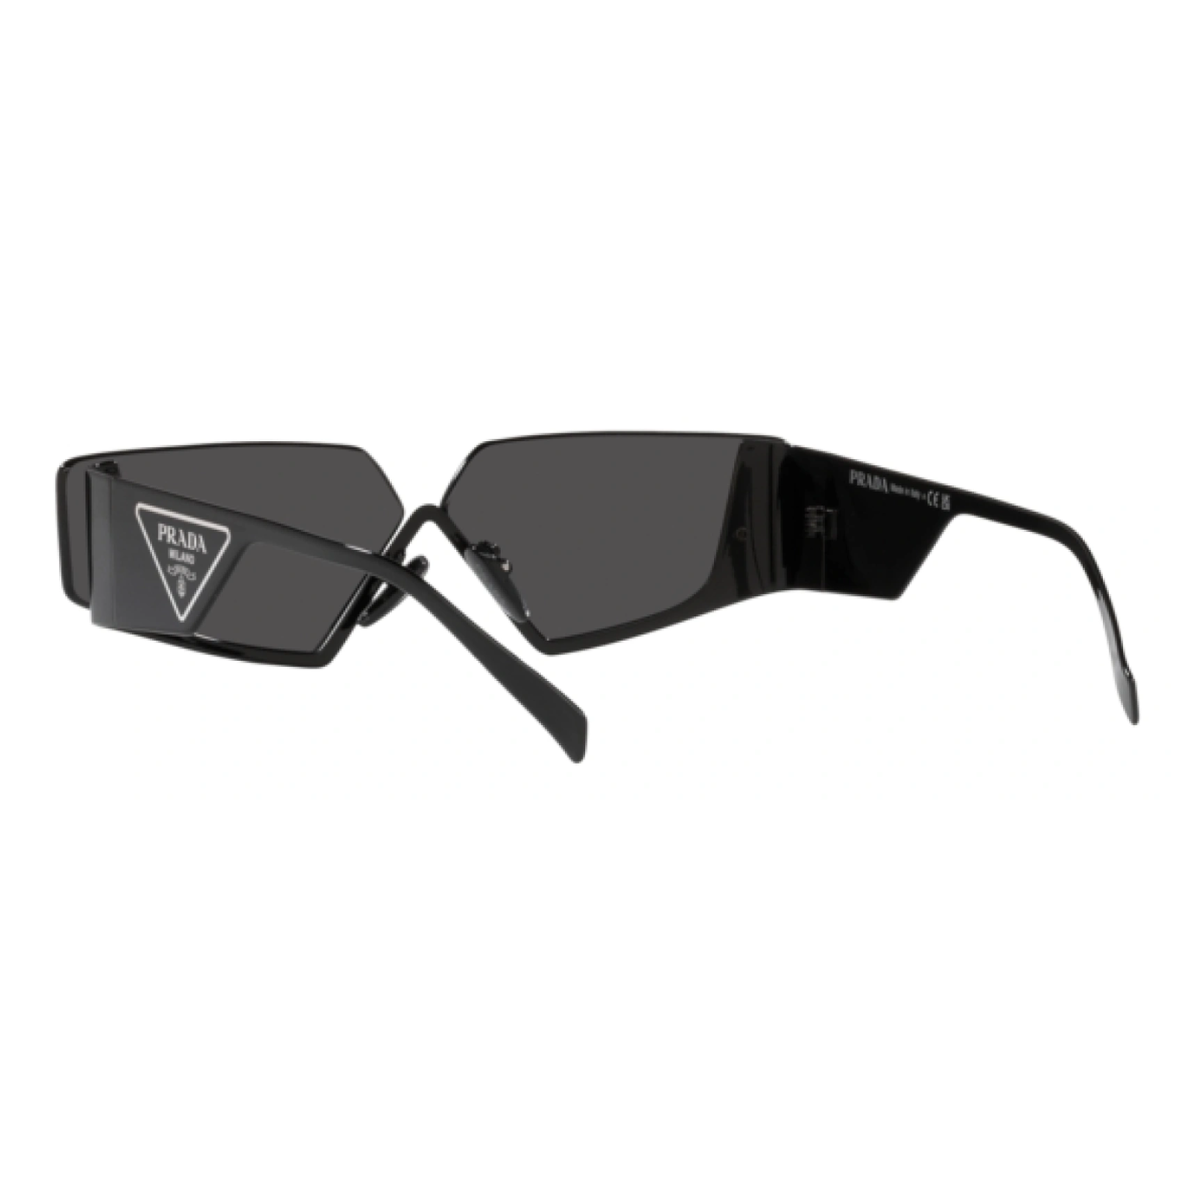 "Discover timeless sophistication with Prada SPR 58Z 1AB-06L sunglasses at Optorium. These sleek metal rectangle shades in classic black with non-polarized grey lenses cater to both men and women's fashion needs."